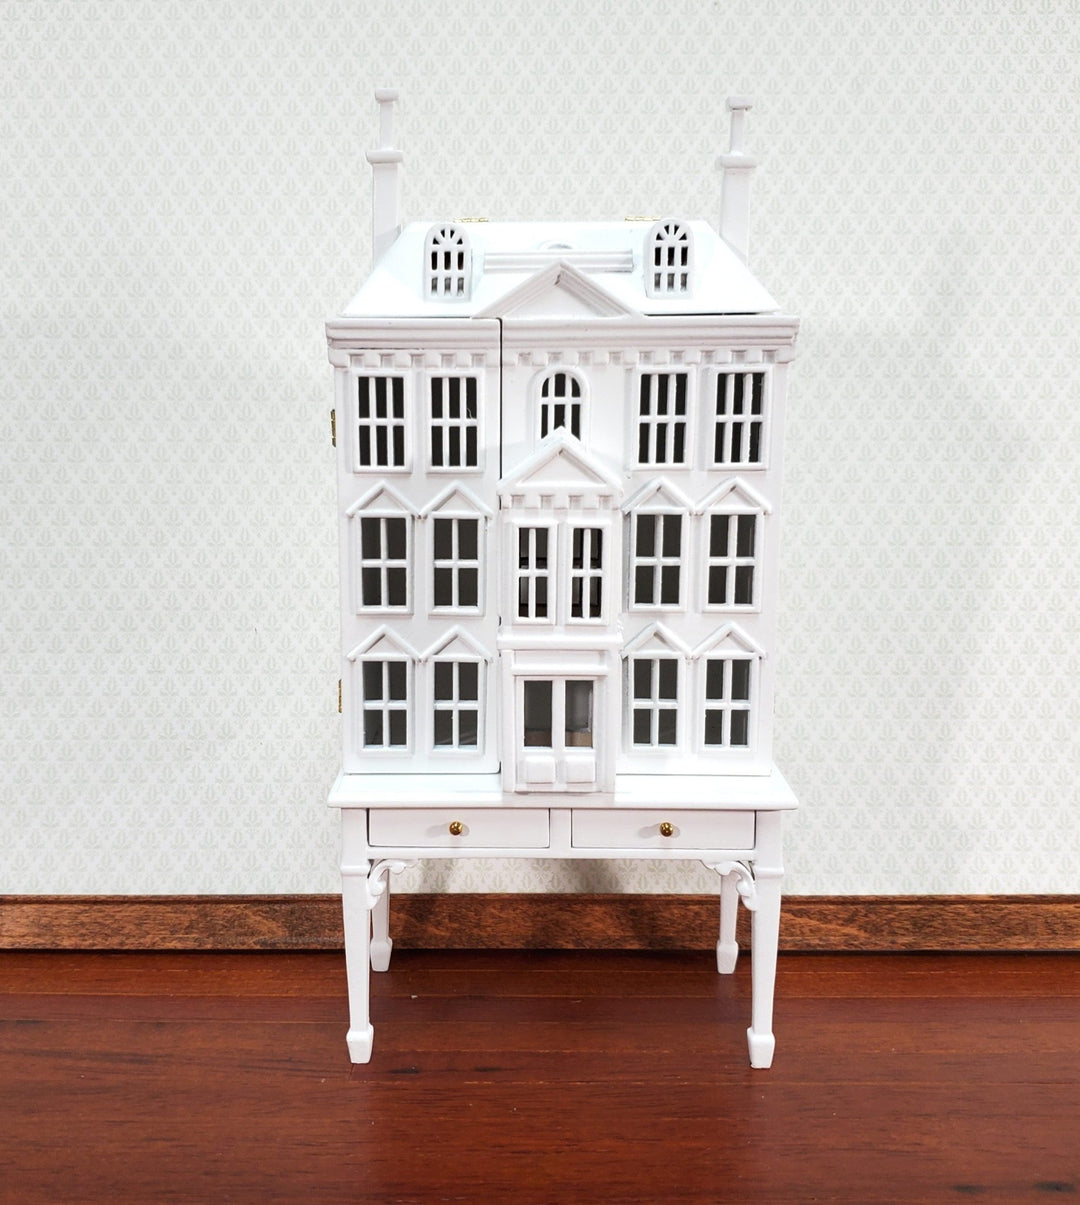 JBM 1:144 Scale Dollhouse with Table White 4 Level Front Opening Miniature - Miniature Crush